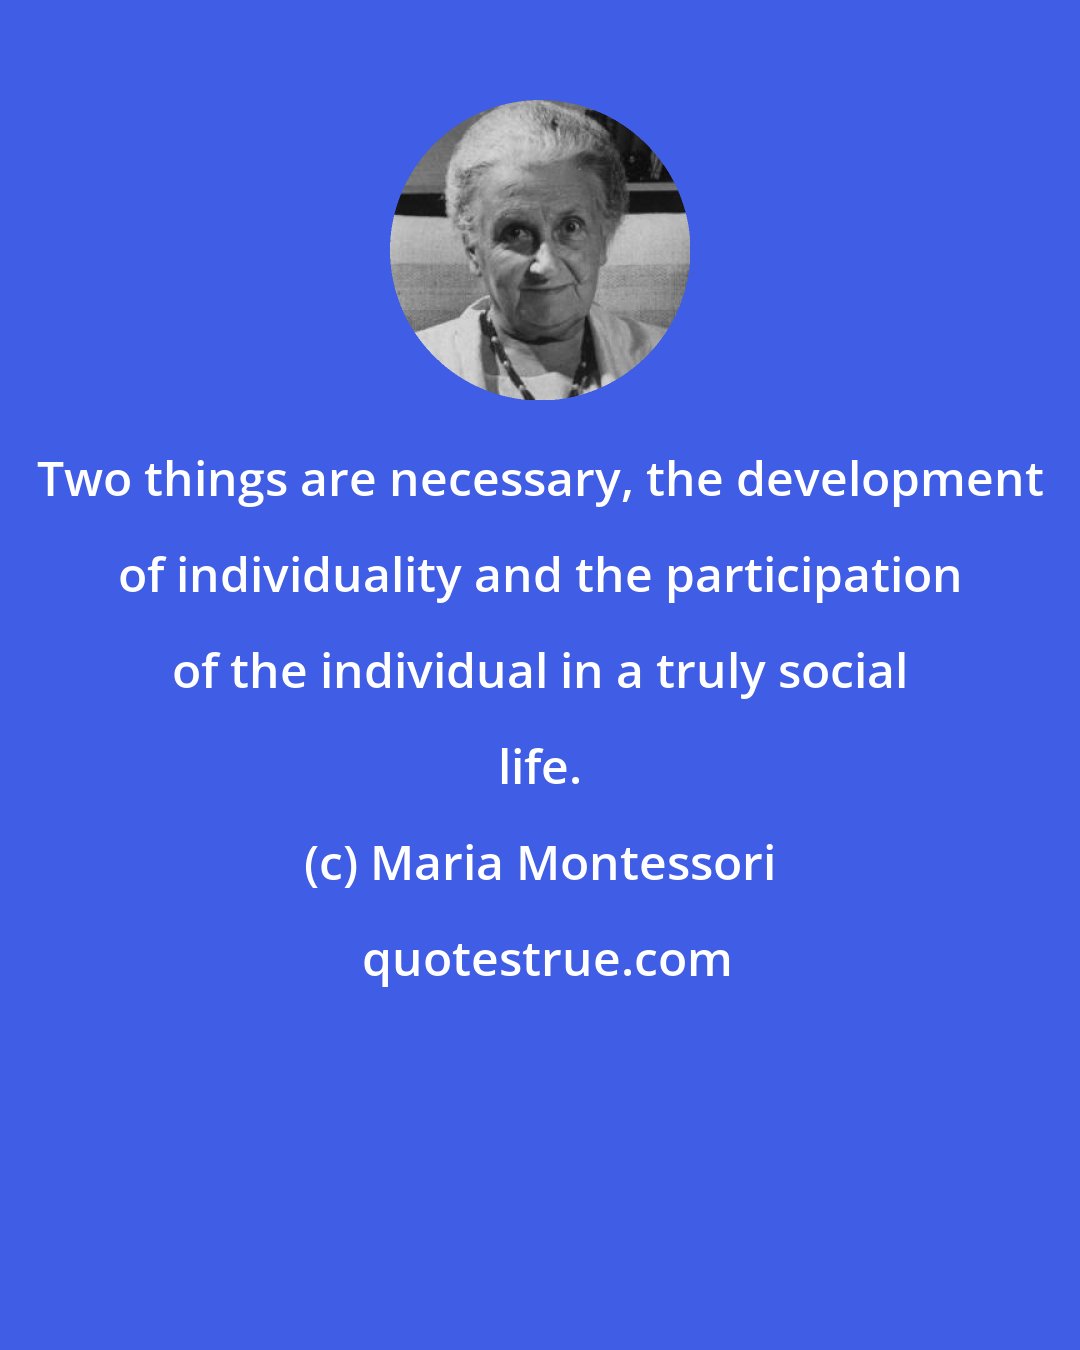 Maria Montessori: Two things are necessary, the development of individuality and the participation of the individual in a truly social life.